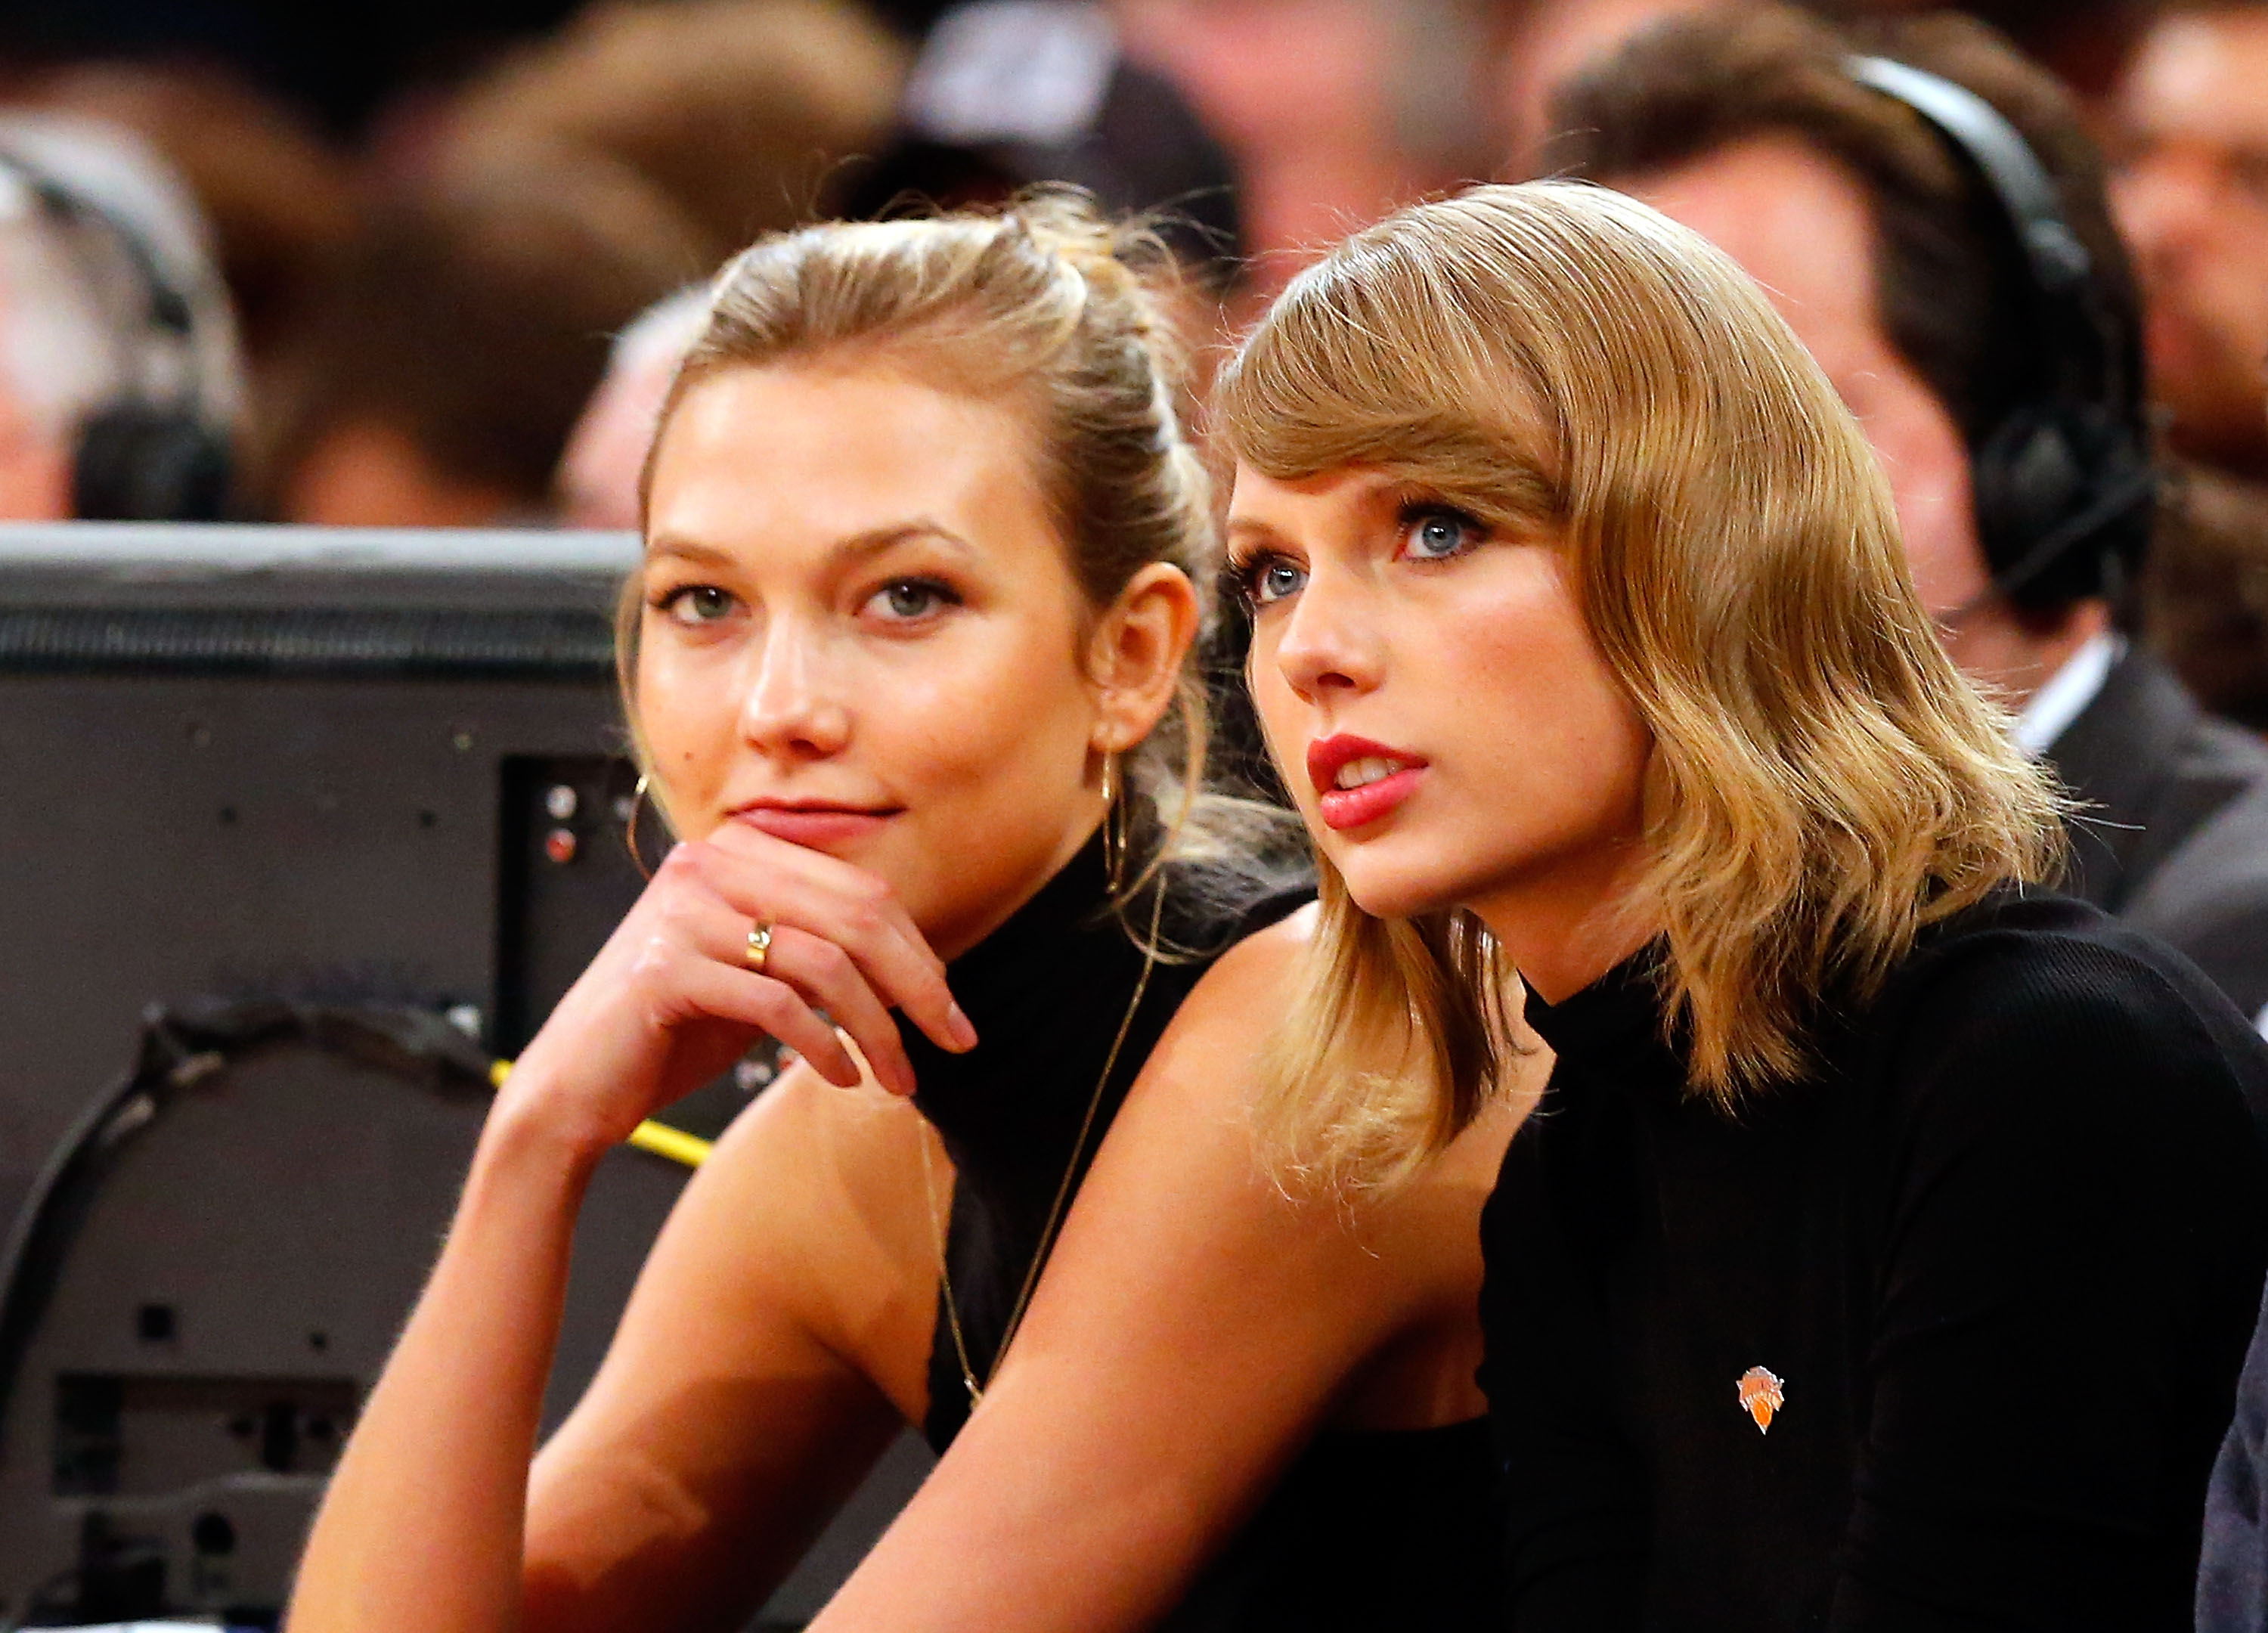 What Happened Between Taylor Swift, Karlie Kloss? Model Spotted at